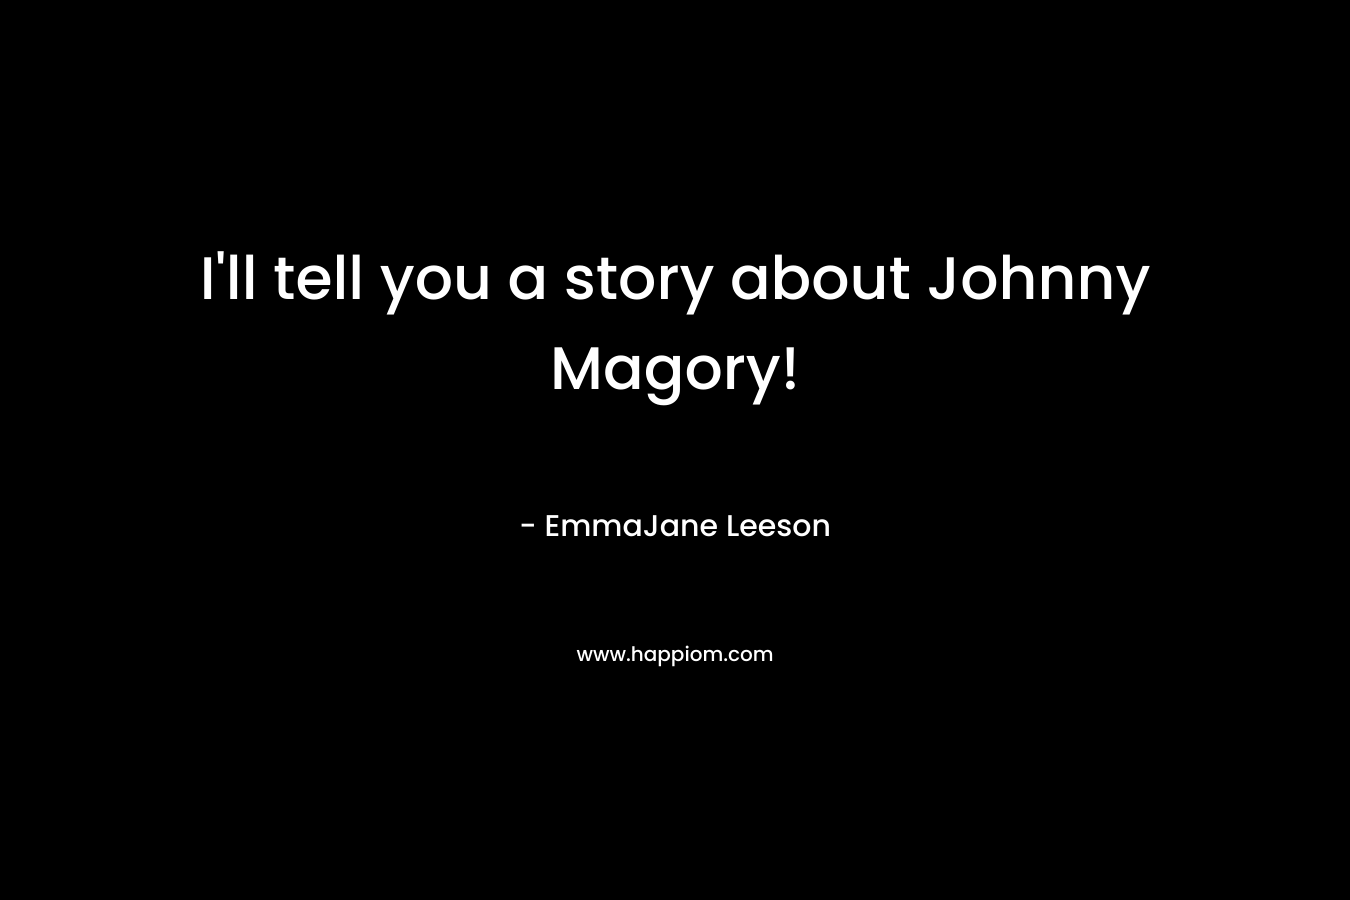 I'll tell you a story about Johnny Magory!